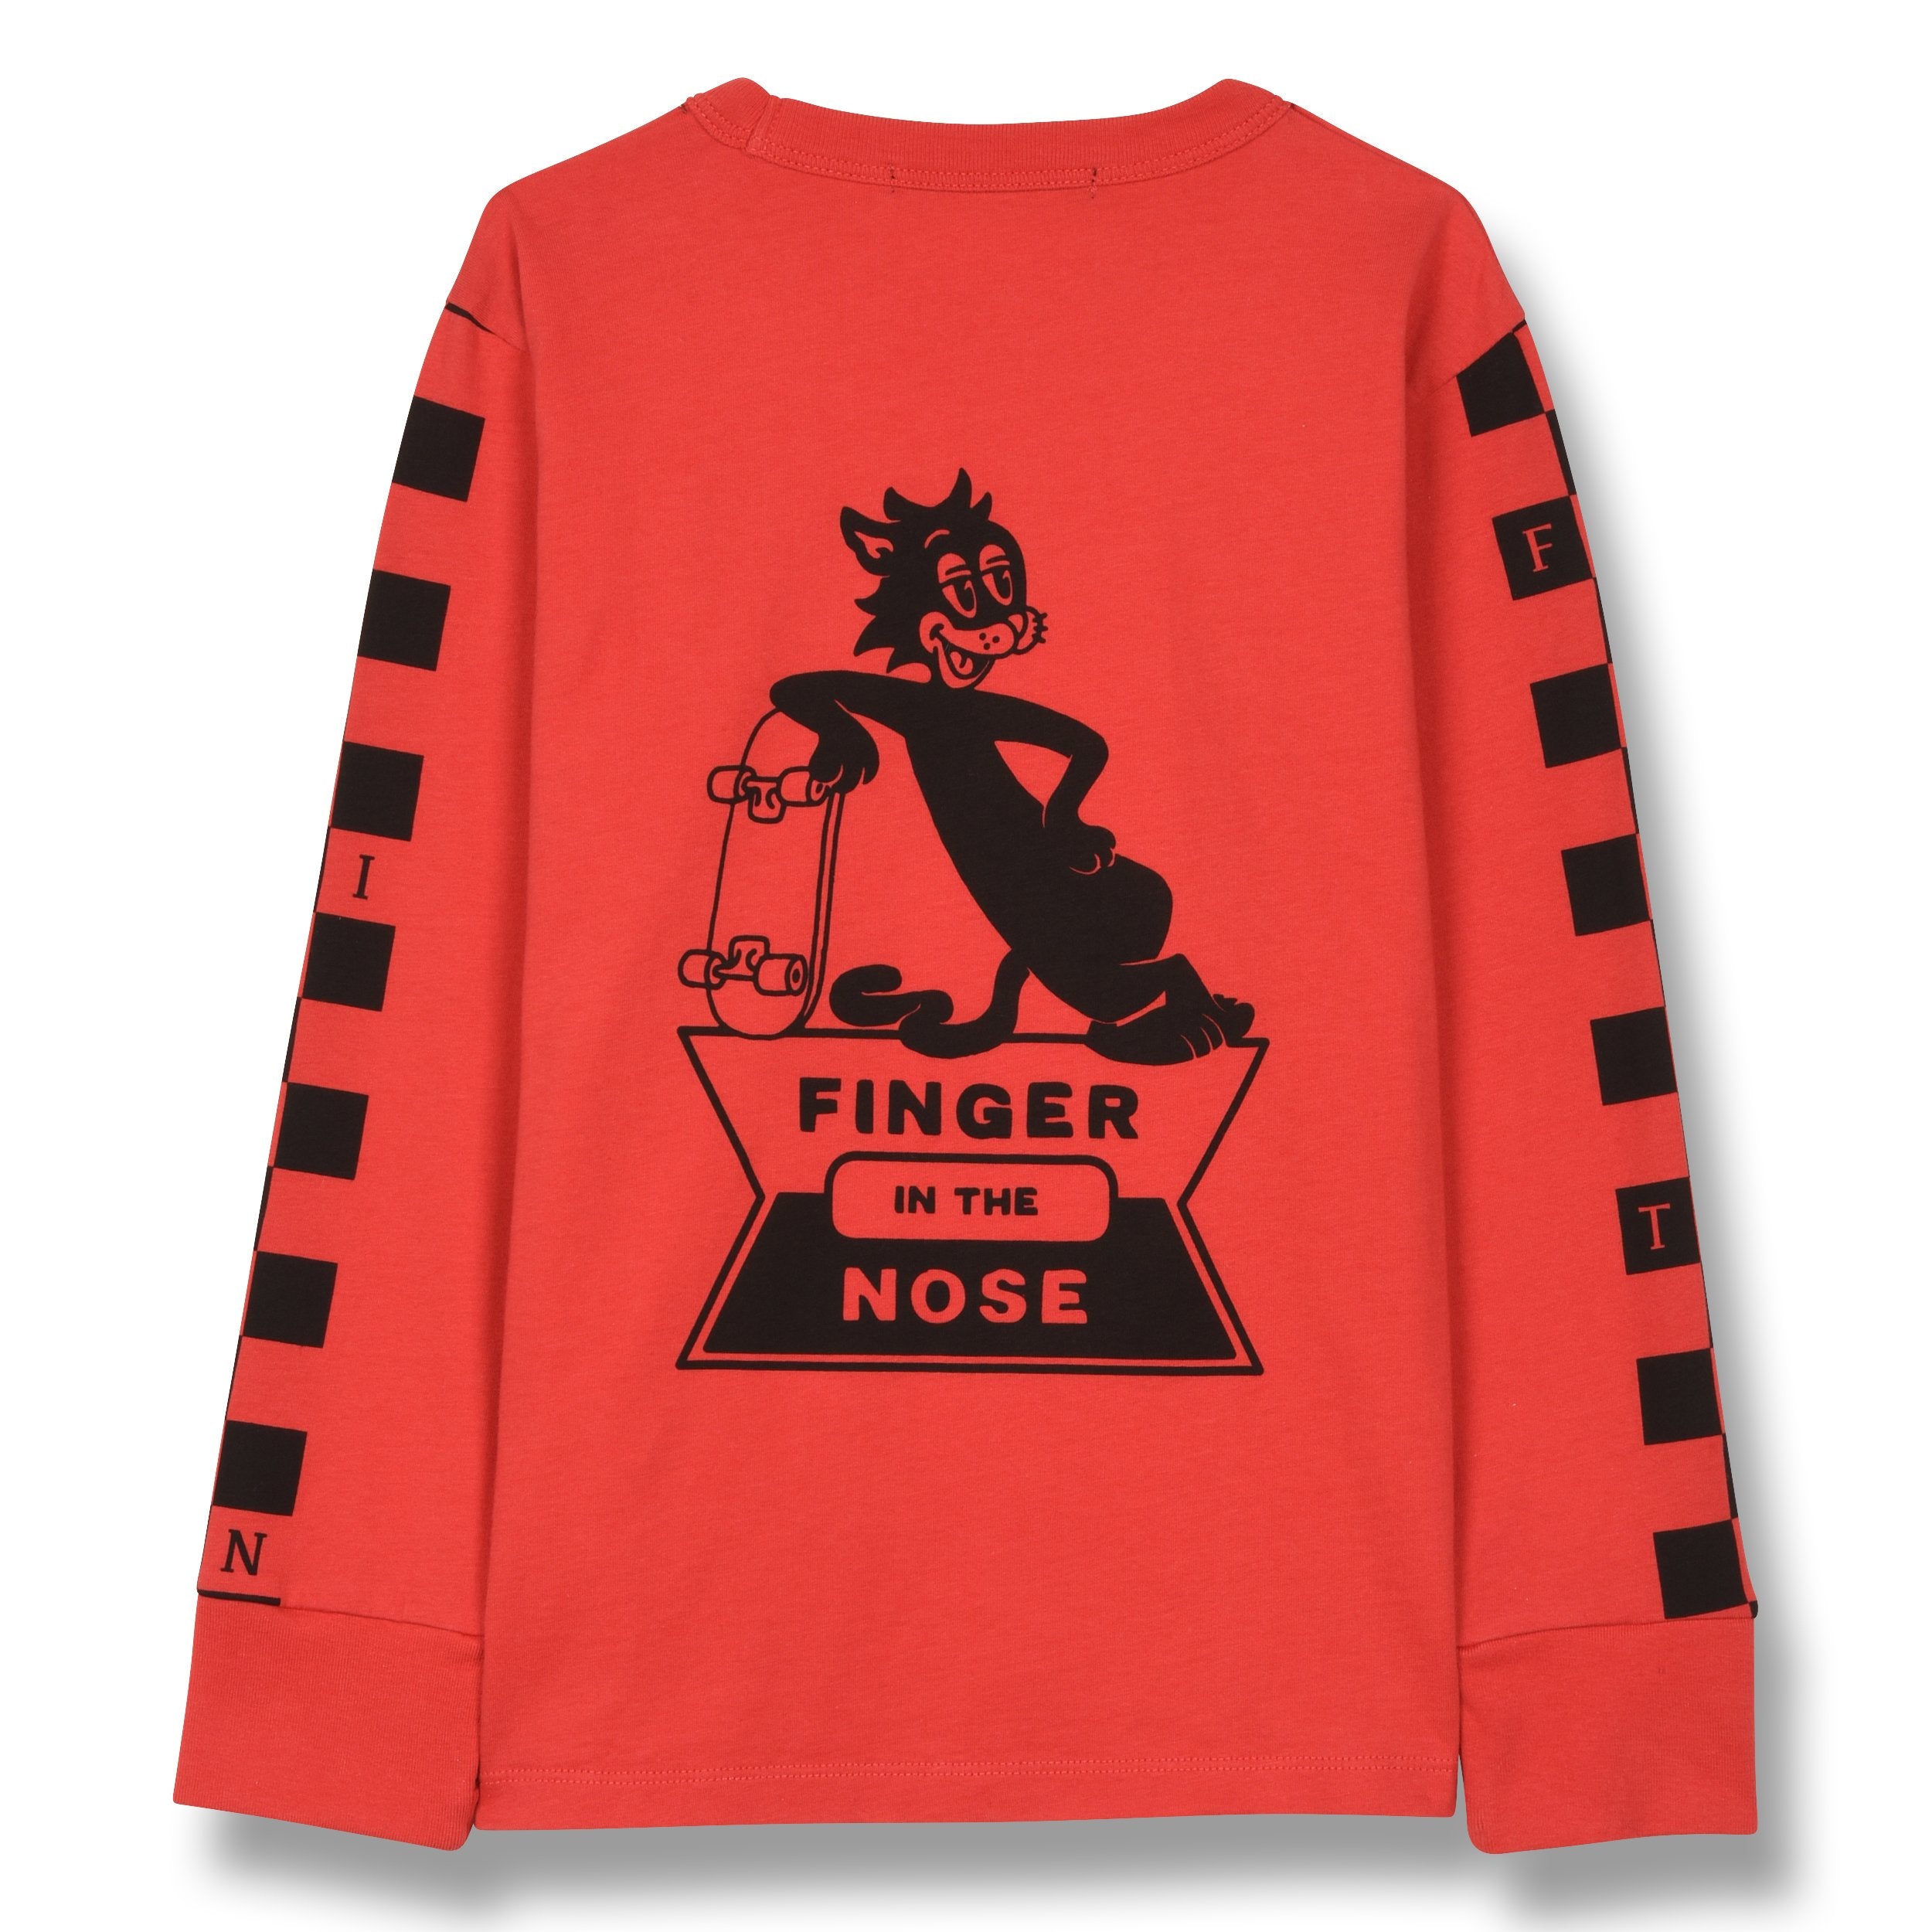 NICO RED SKATE CAT-TOPS & T-SHIRTS-FINGER IN THE NOSE-Maralex Paris (3568167583807)